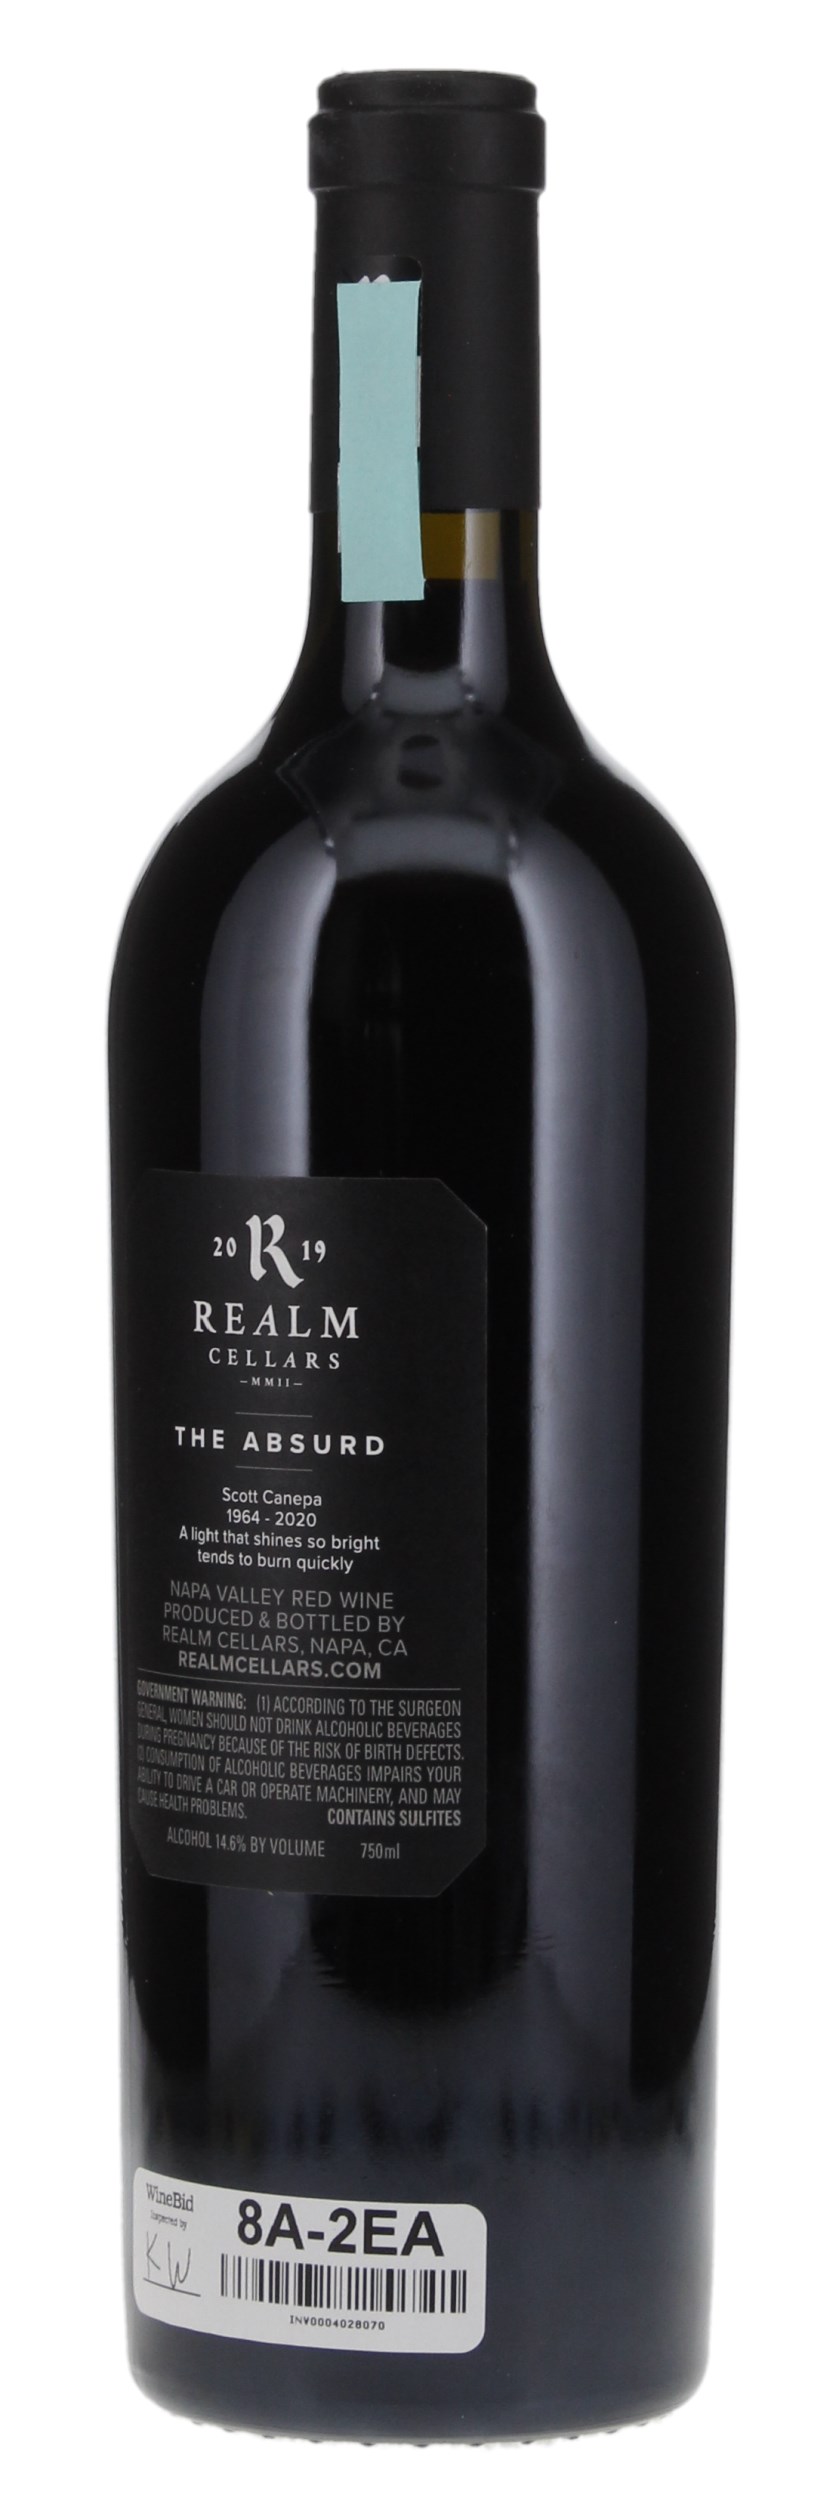 2019 Realm The Absurd, 750ml